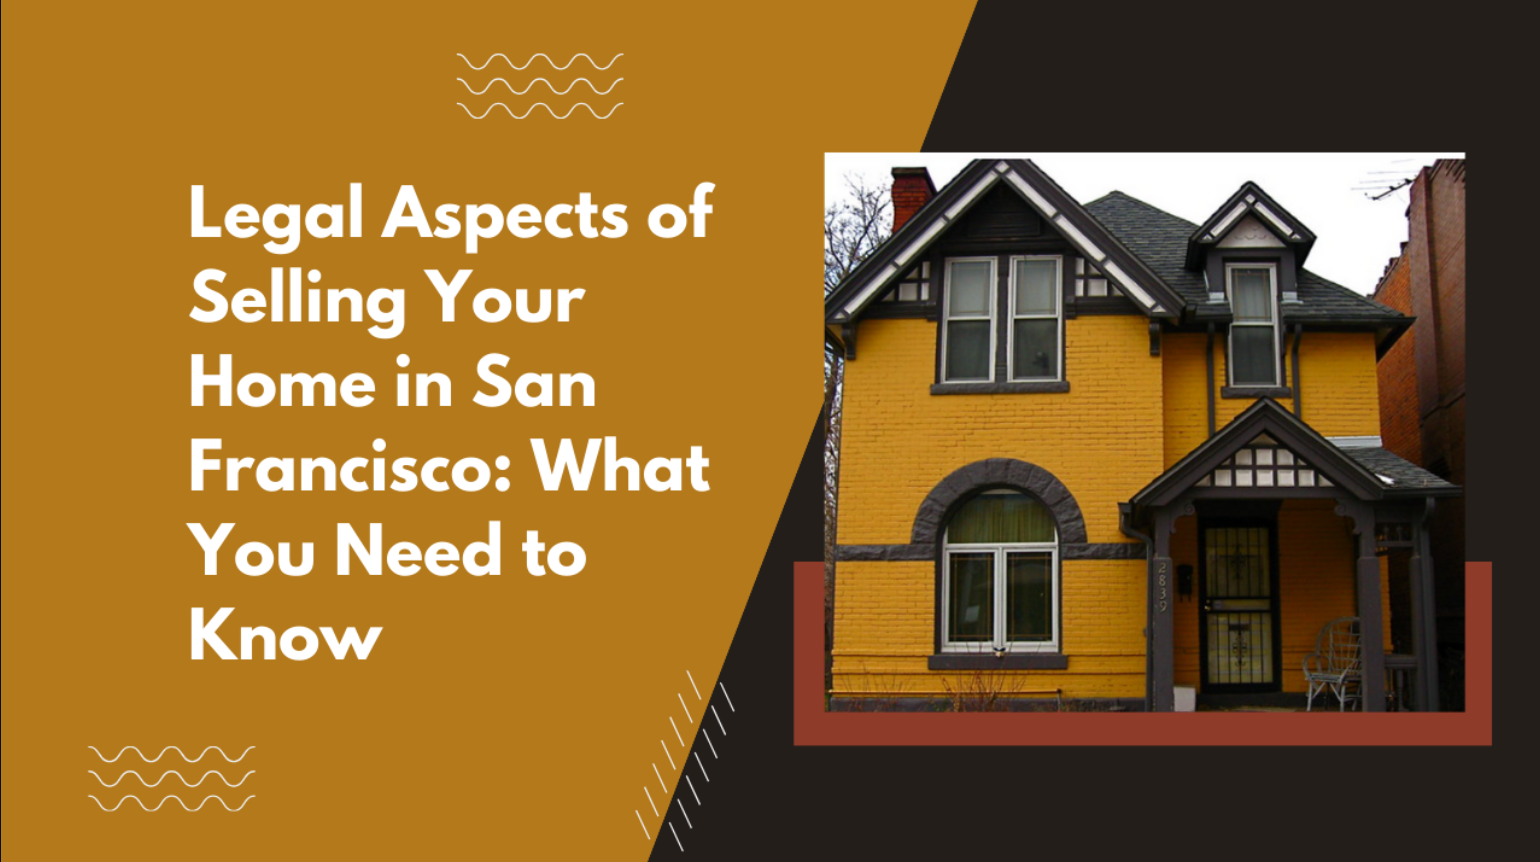 Legal Aspects of Selling Your Home in San Francisco: What You Need to Know